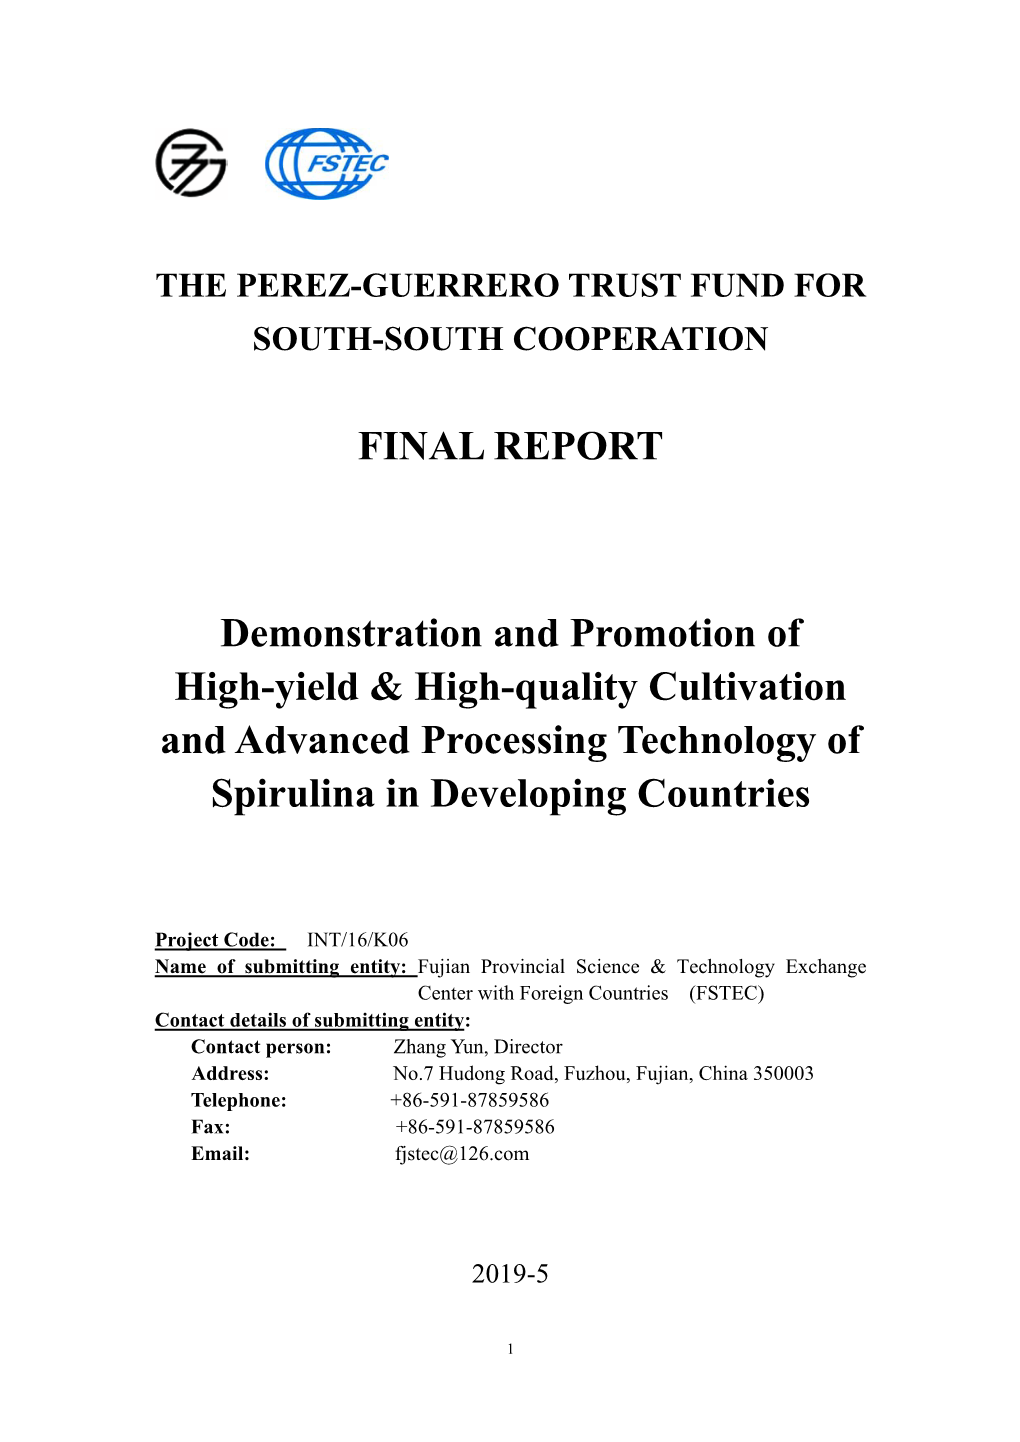 FINAL REPORT Demonstration and Promotion of High-Yield & High